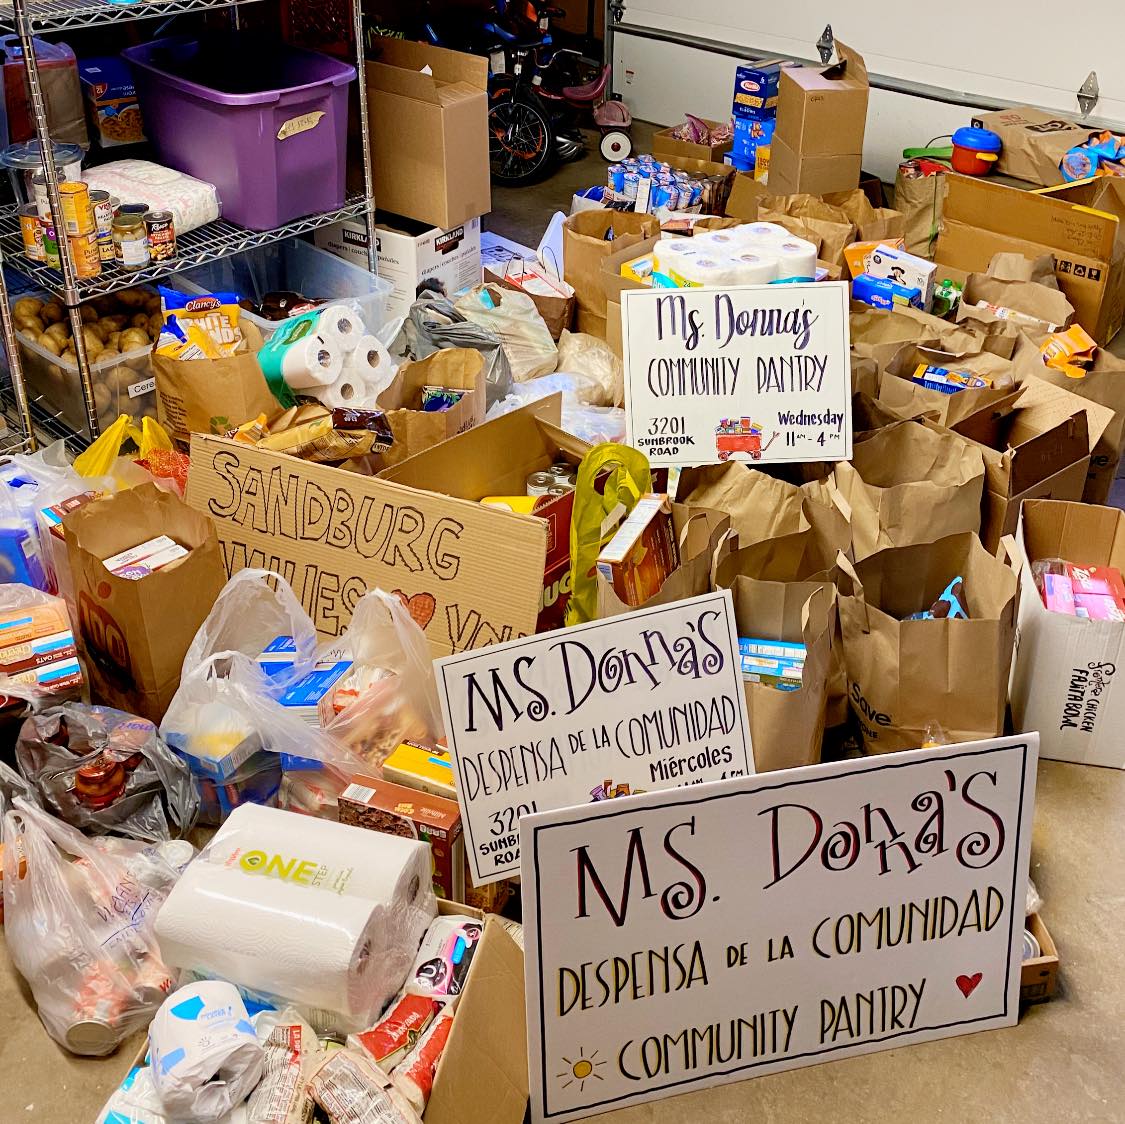 Impromptu food pantry started six weeks ago now serves 100 families